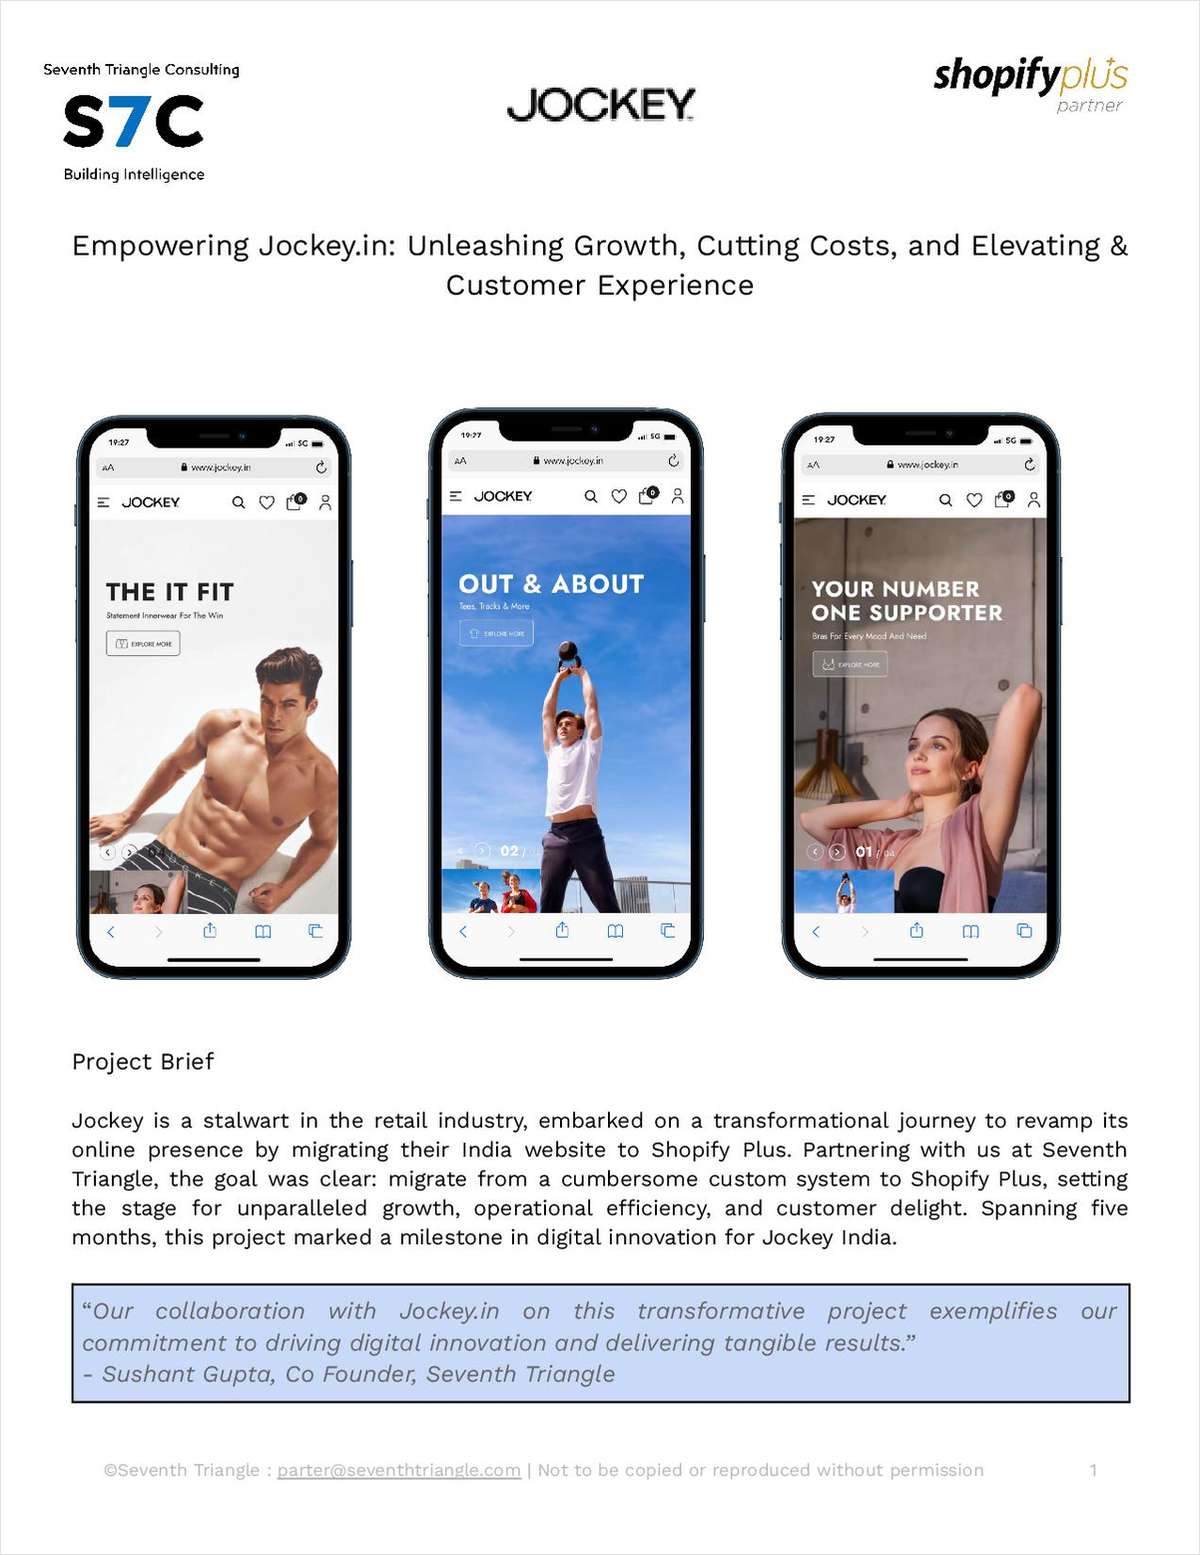 Empowering Jockey.in: Unleashing Growth, Cutting Costs, and Elevating Customer Experience